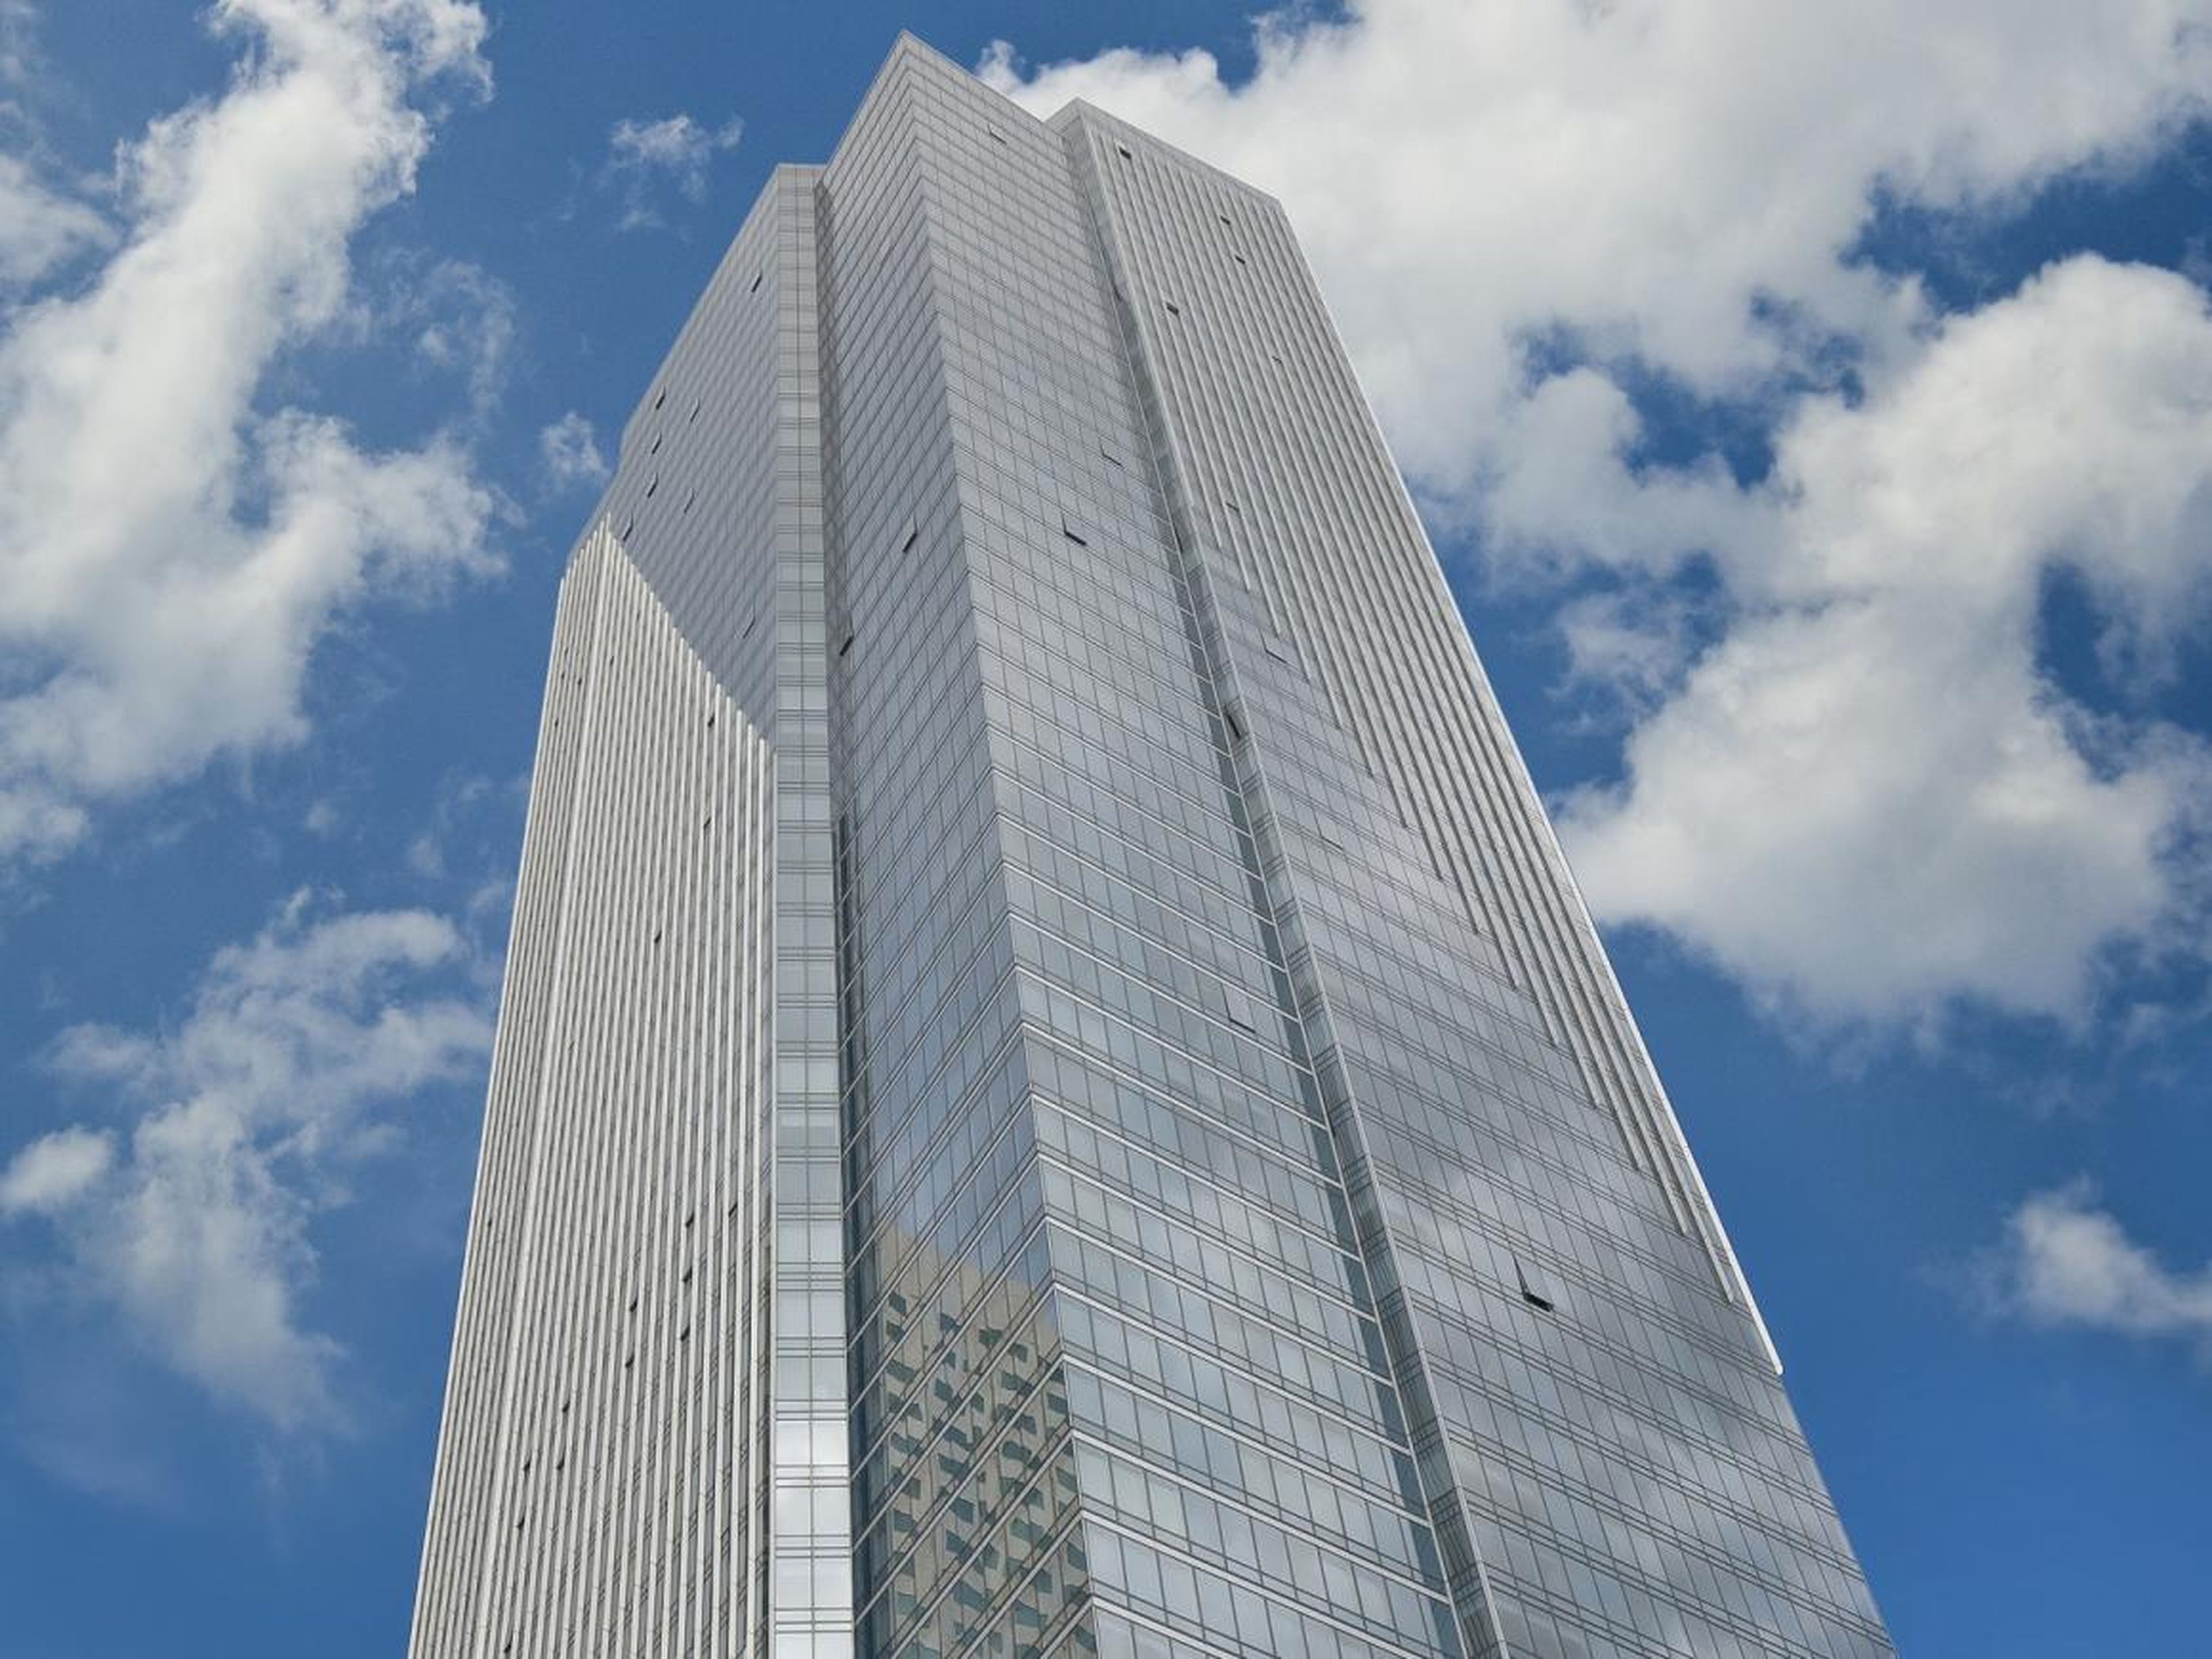 To date, nine lawsuits have been filed about the tower's tilting and sinking.